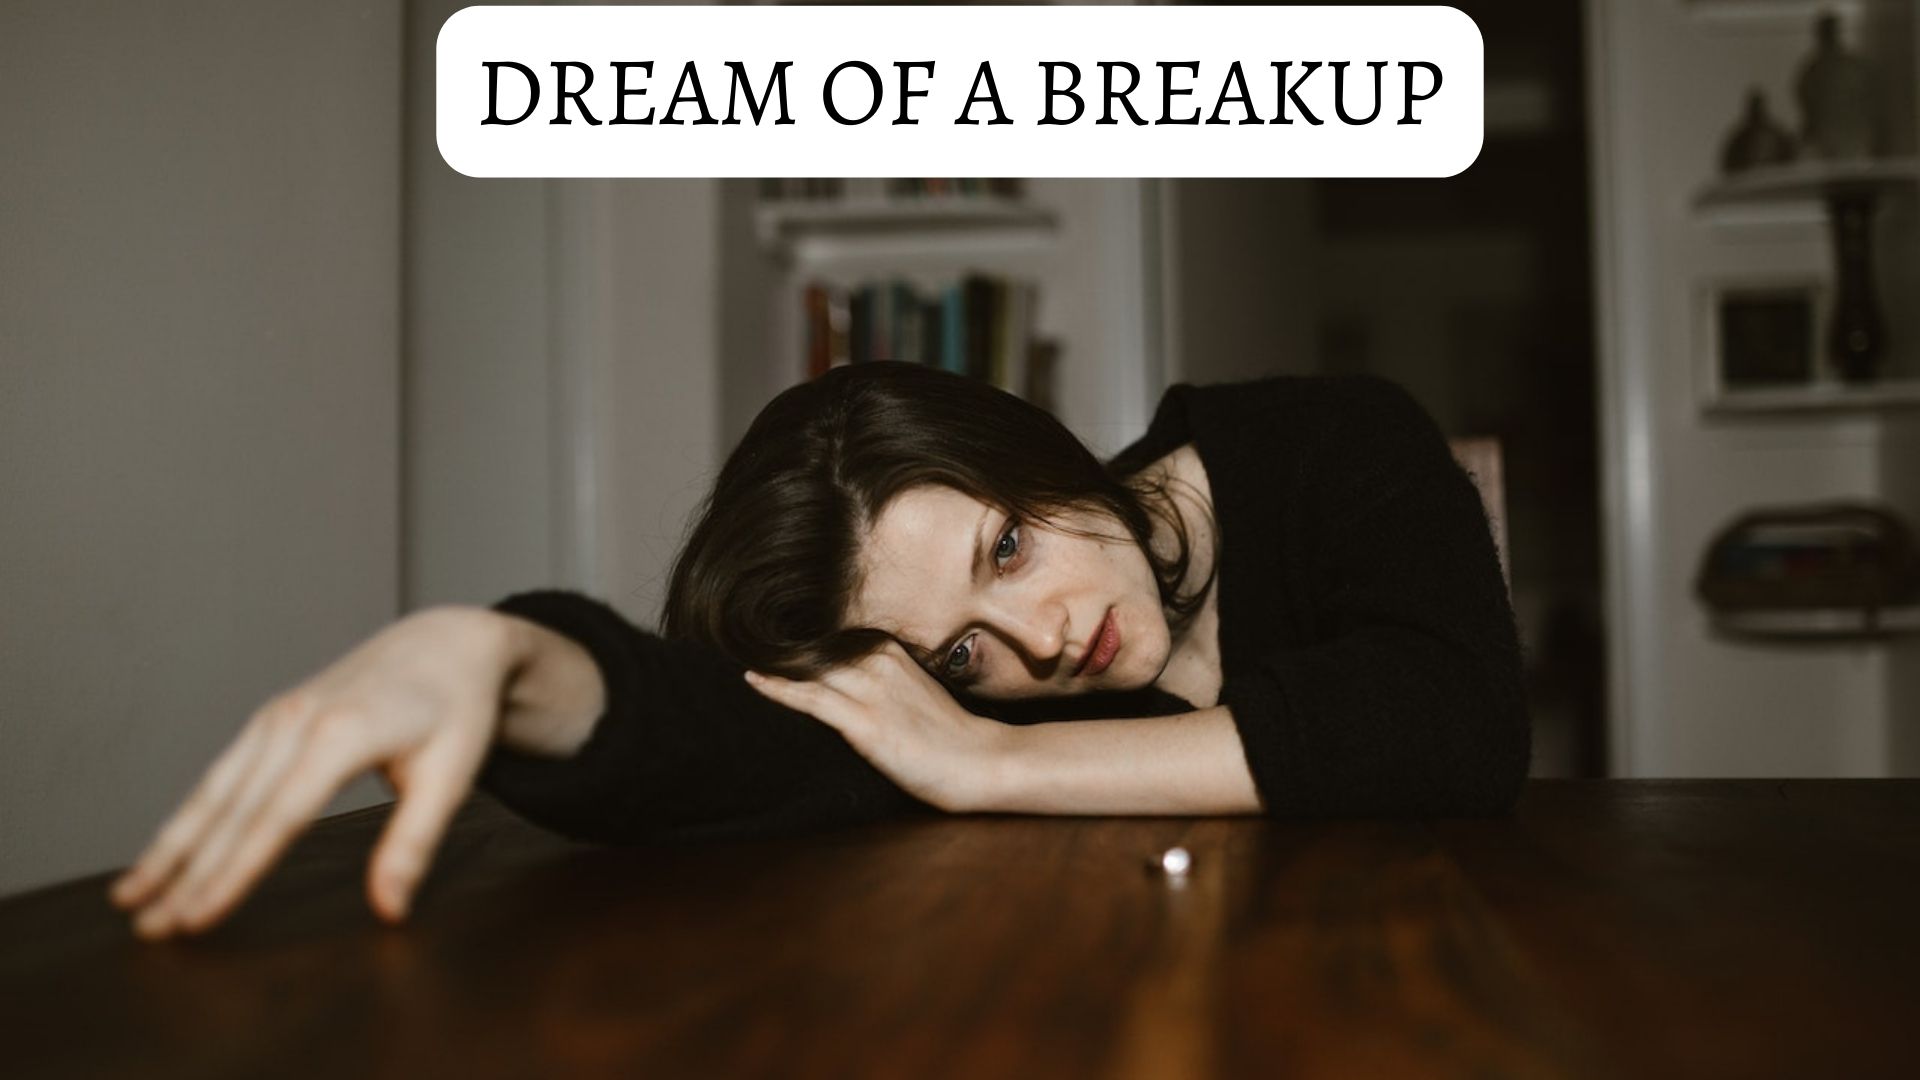 Dream Of A Breakup - Symbolize Troubles Or Problems